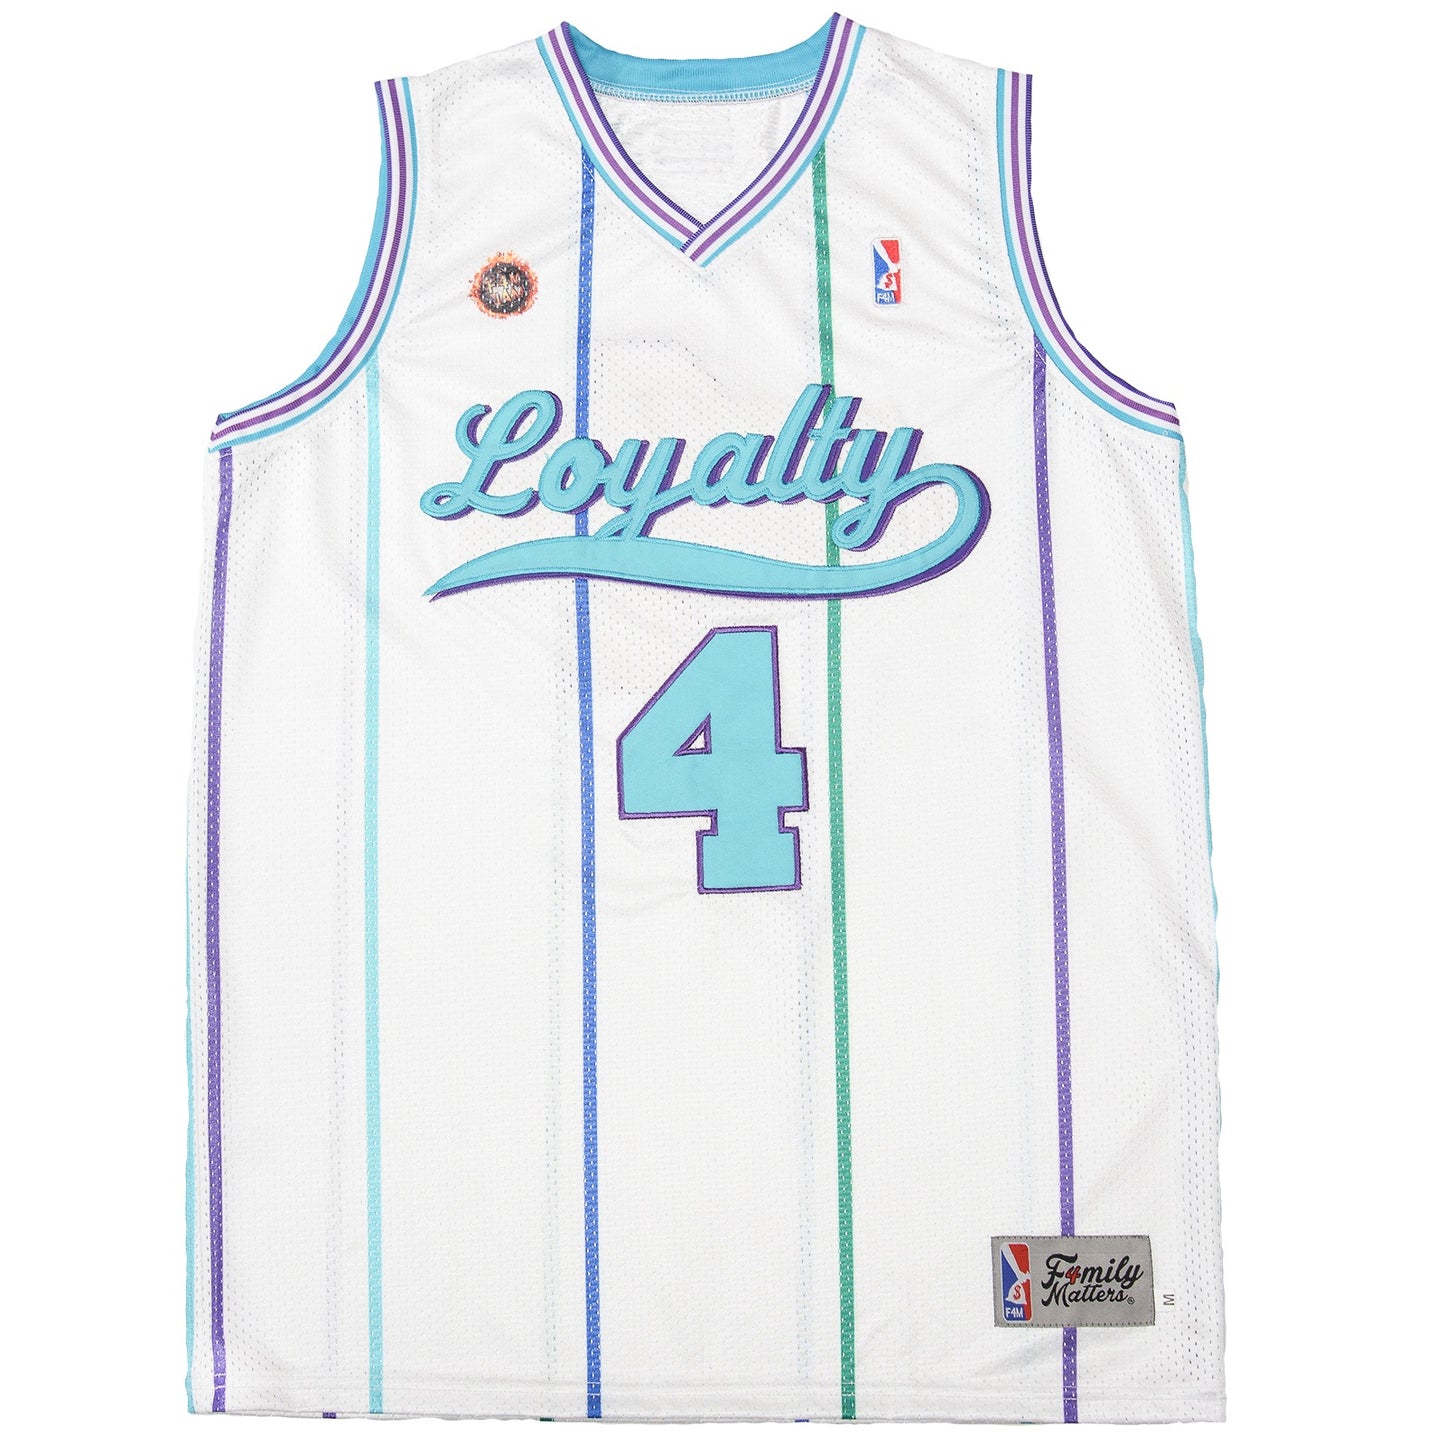 The Loyalty Basketball Jersey in White